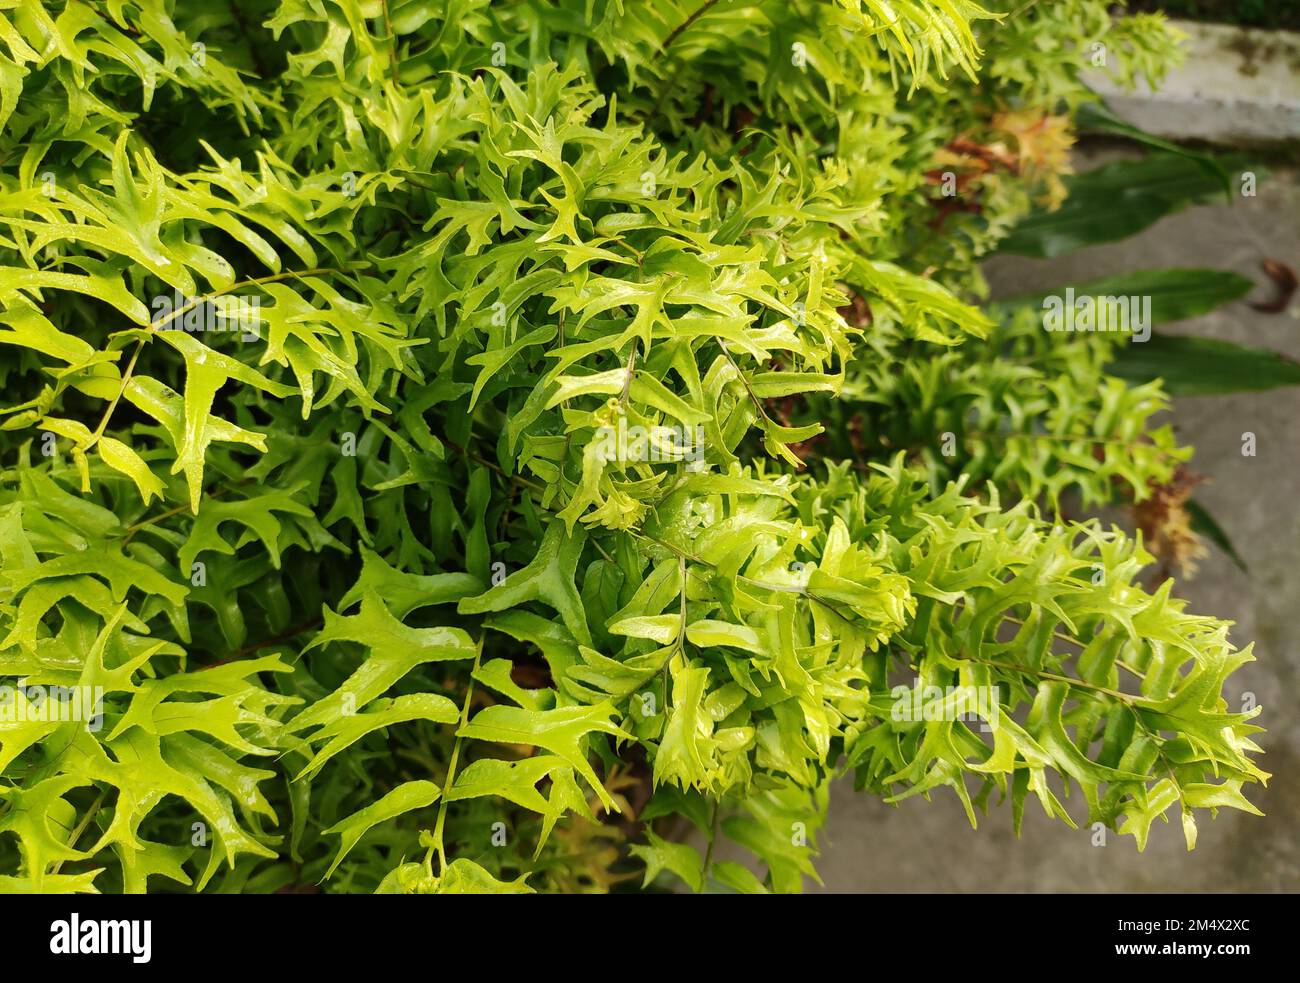 Fishtail fern is one of the ferns that can be used as an ornamental plant. Stock Photo